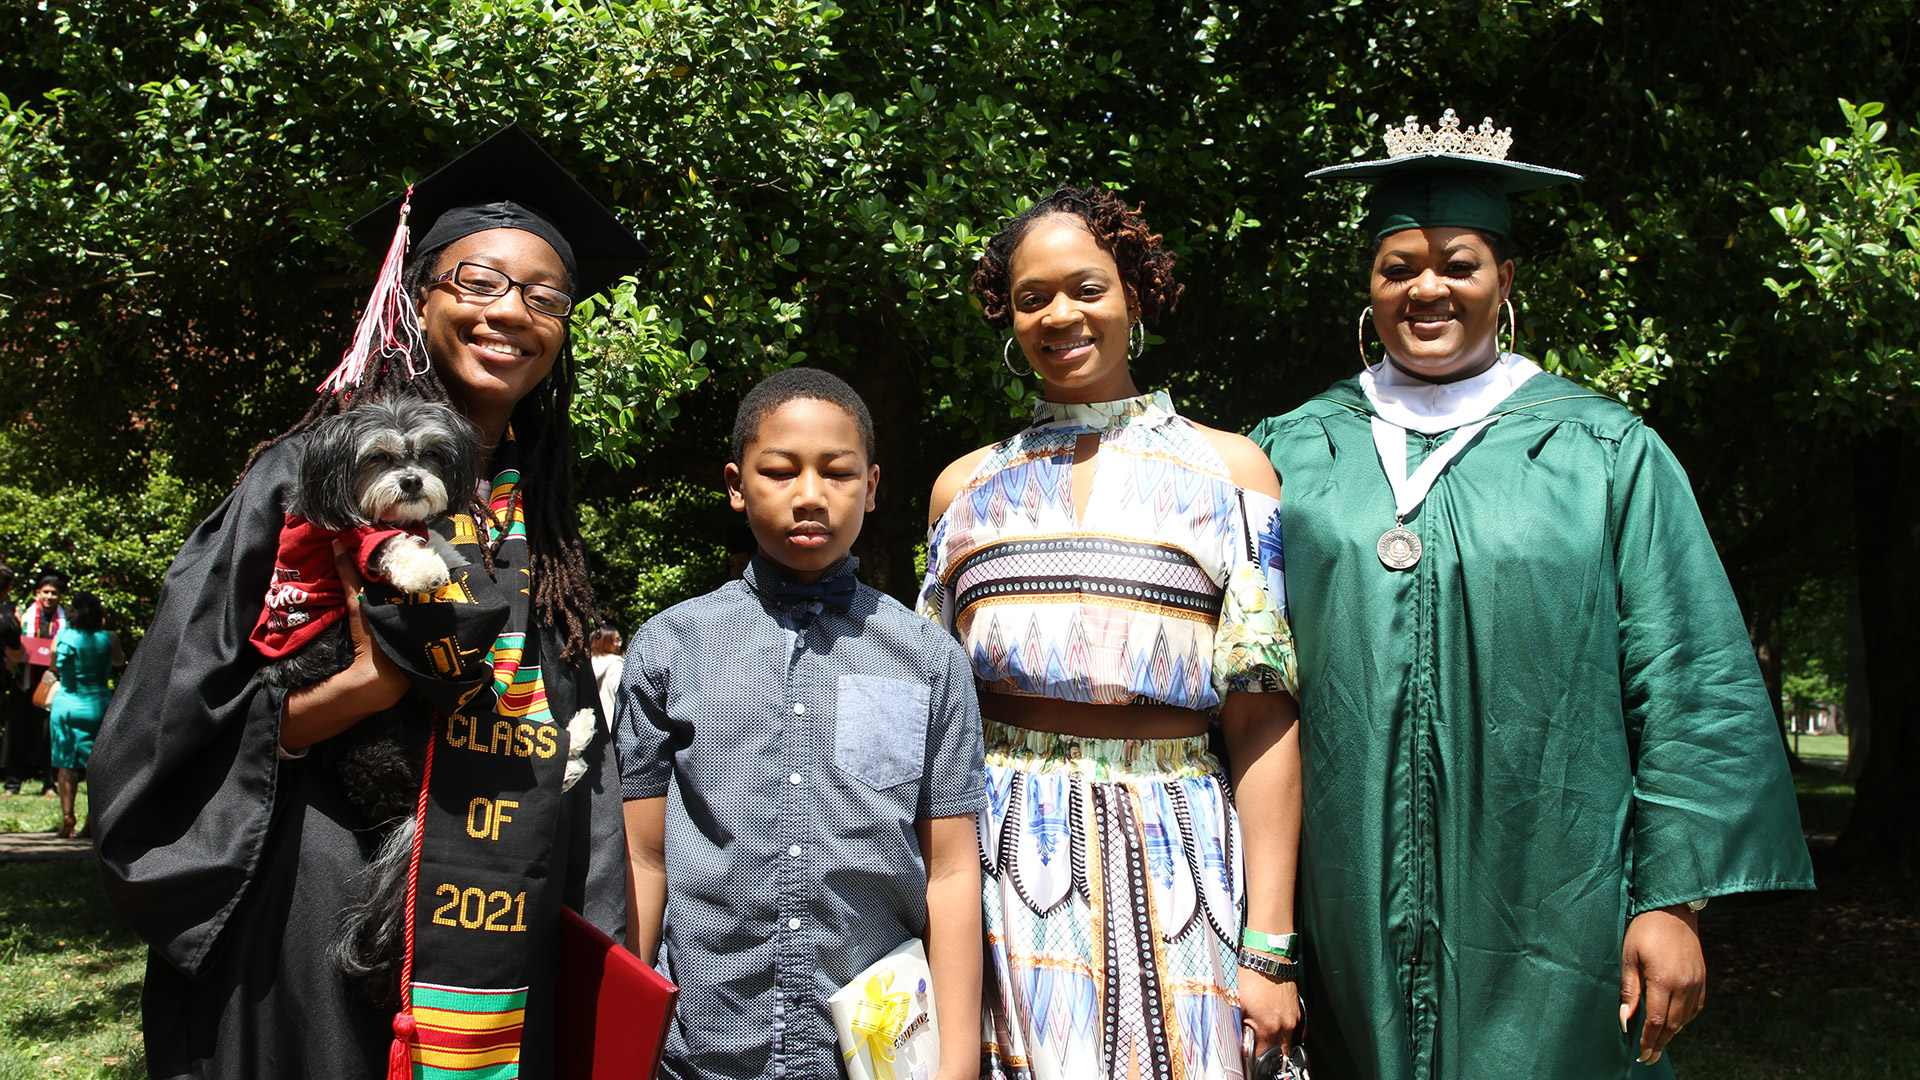 A family takes a photo with a 2021 graduate after Commencement.